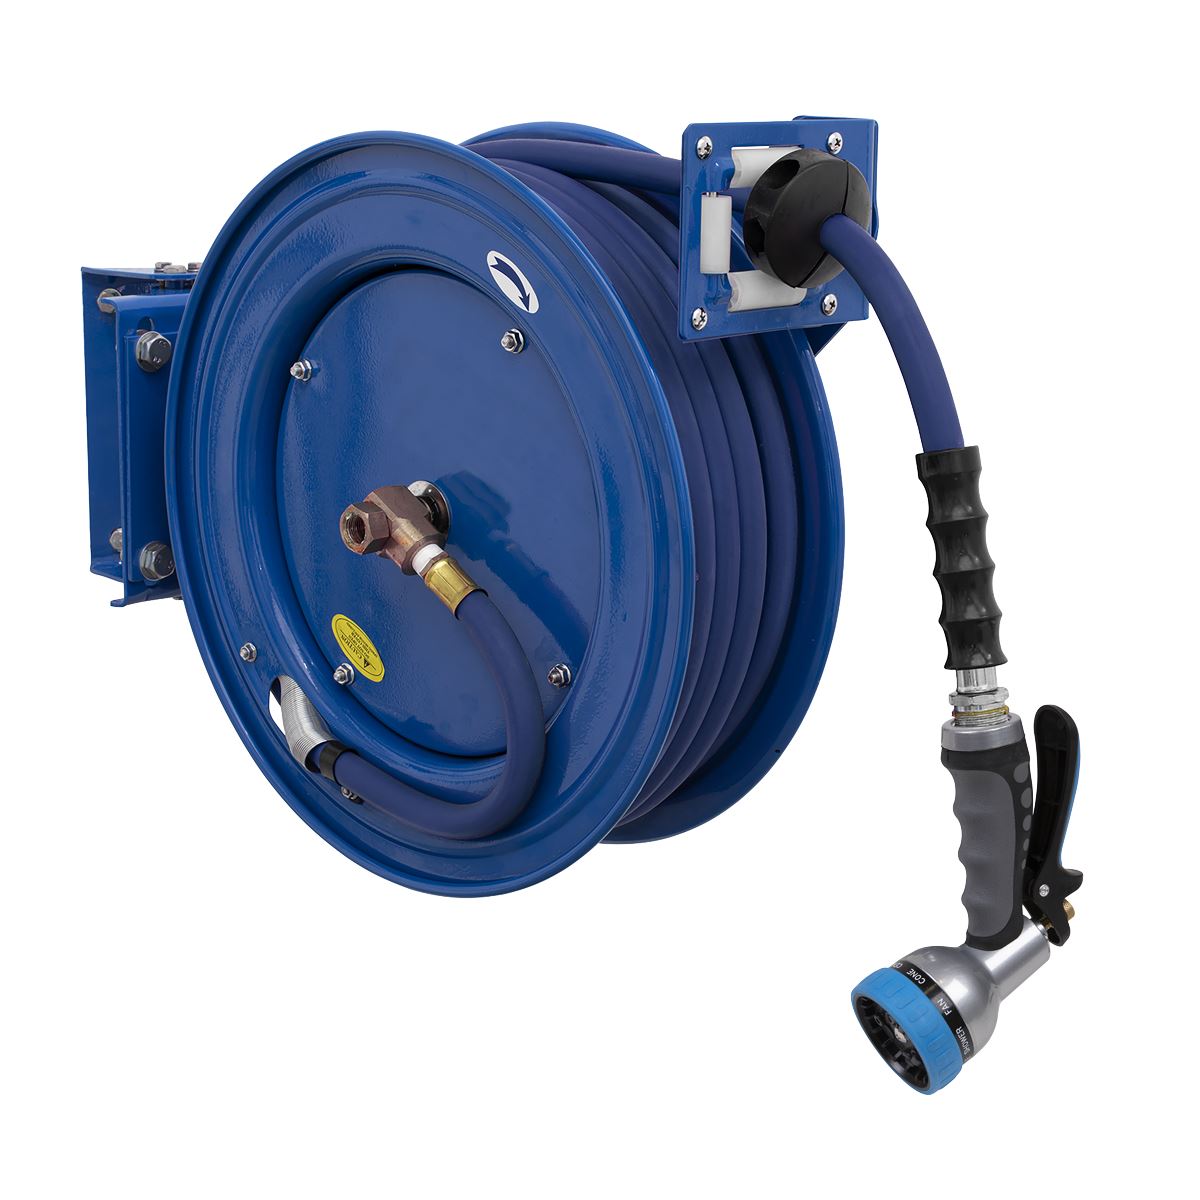 Sealey H/Duty Retractable Water Hose Reel 15m 13mm ID Rubber Hose WHR1512